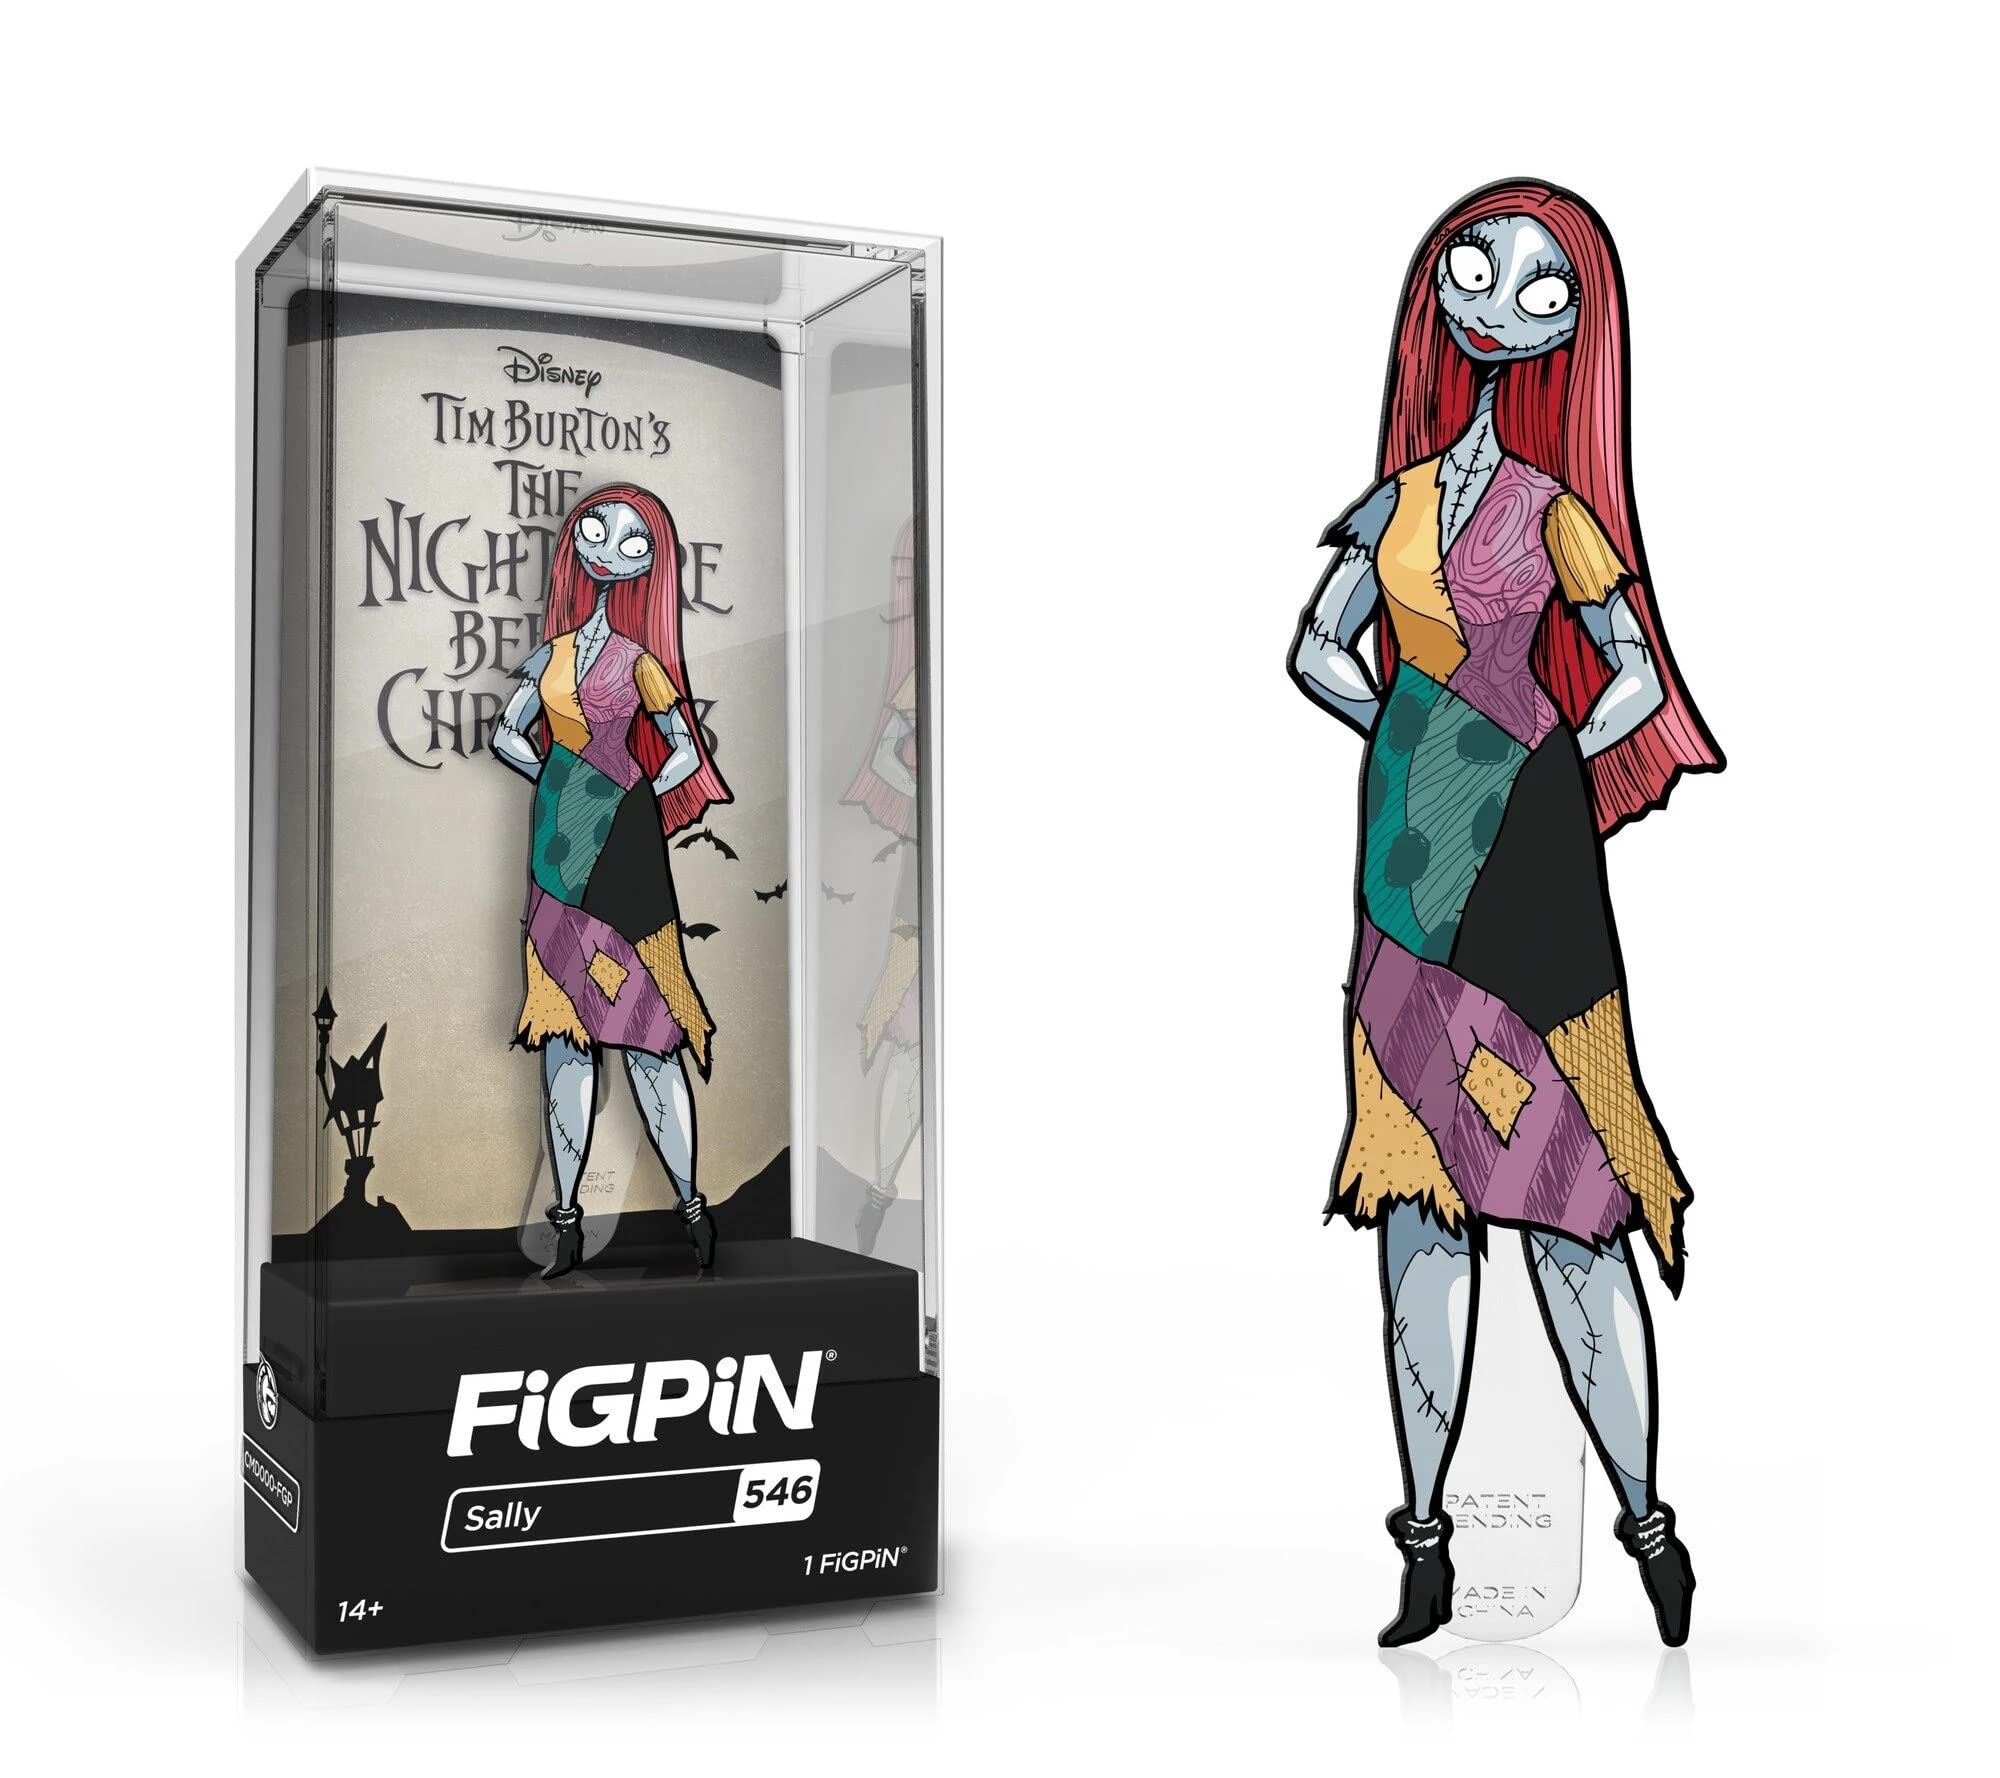 FiGPiN The Nightmare Before Christmas Sally #546, Enamel Pin, Collectible Pin